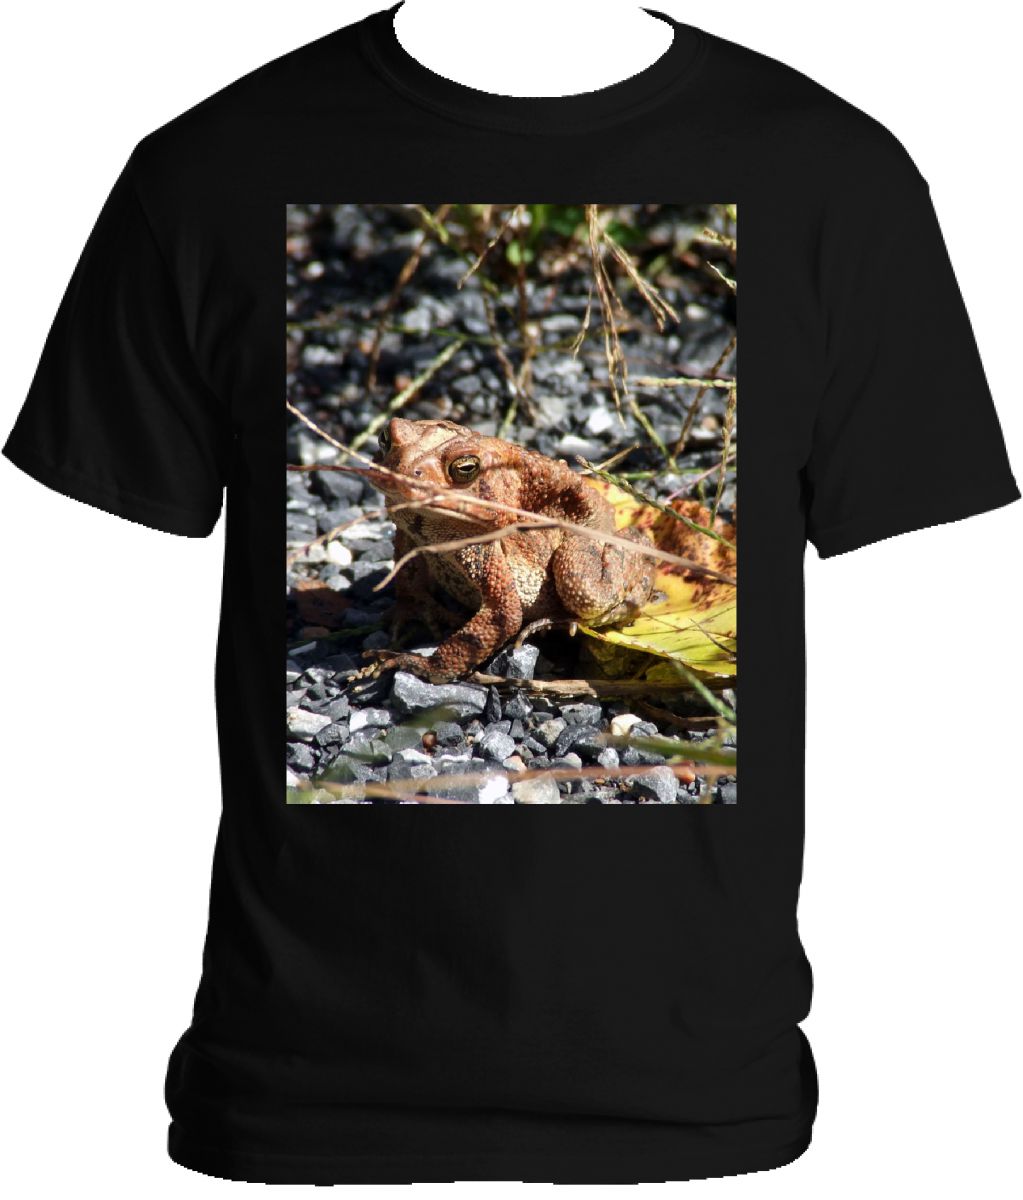 Toad T-shirt